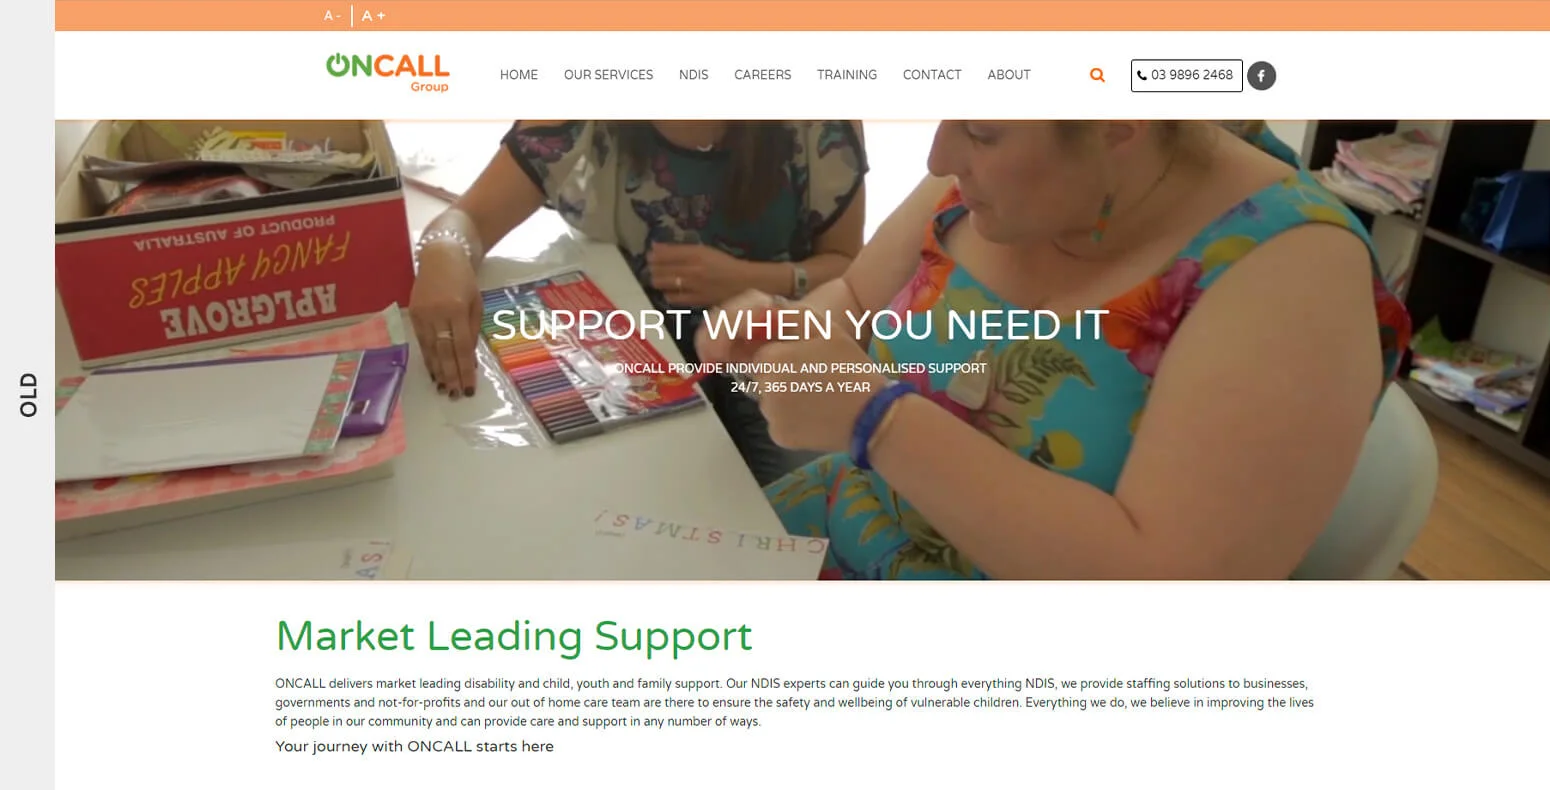 Previous OnCall Group Support Helpline Website Comparison